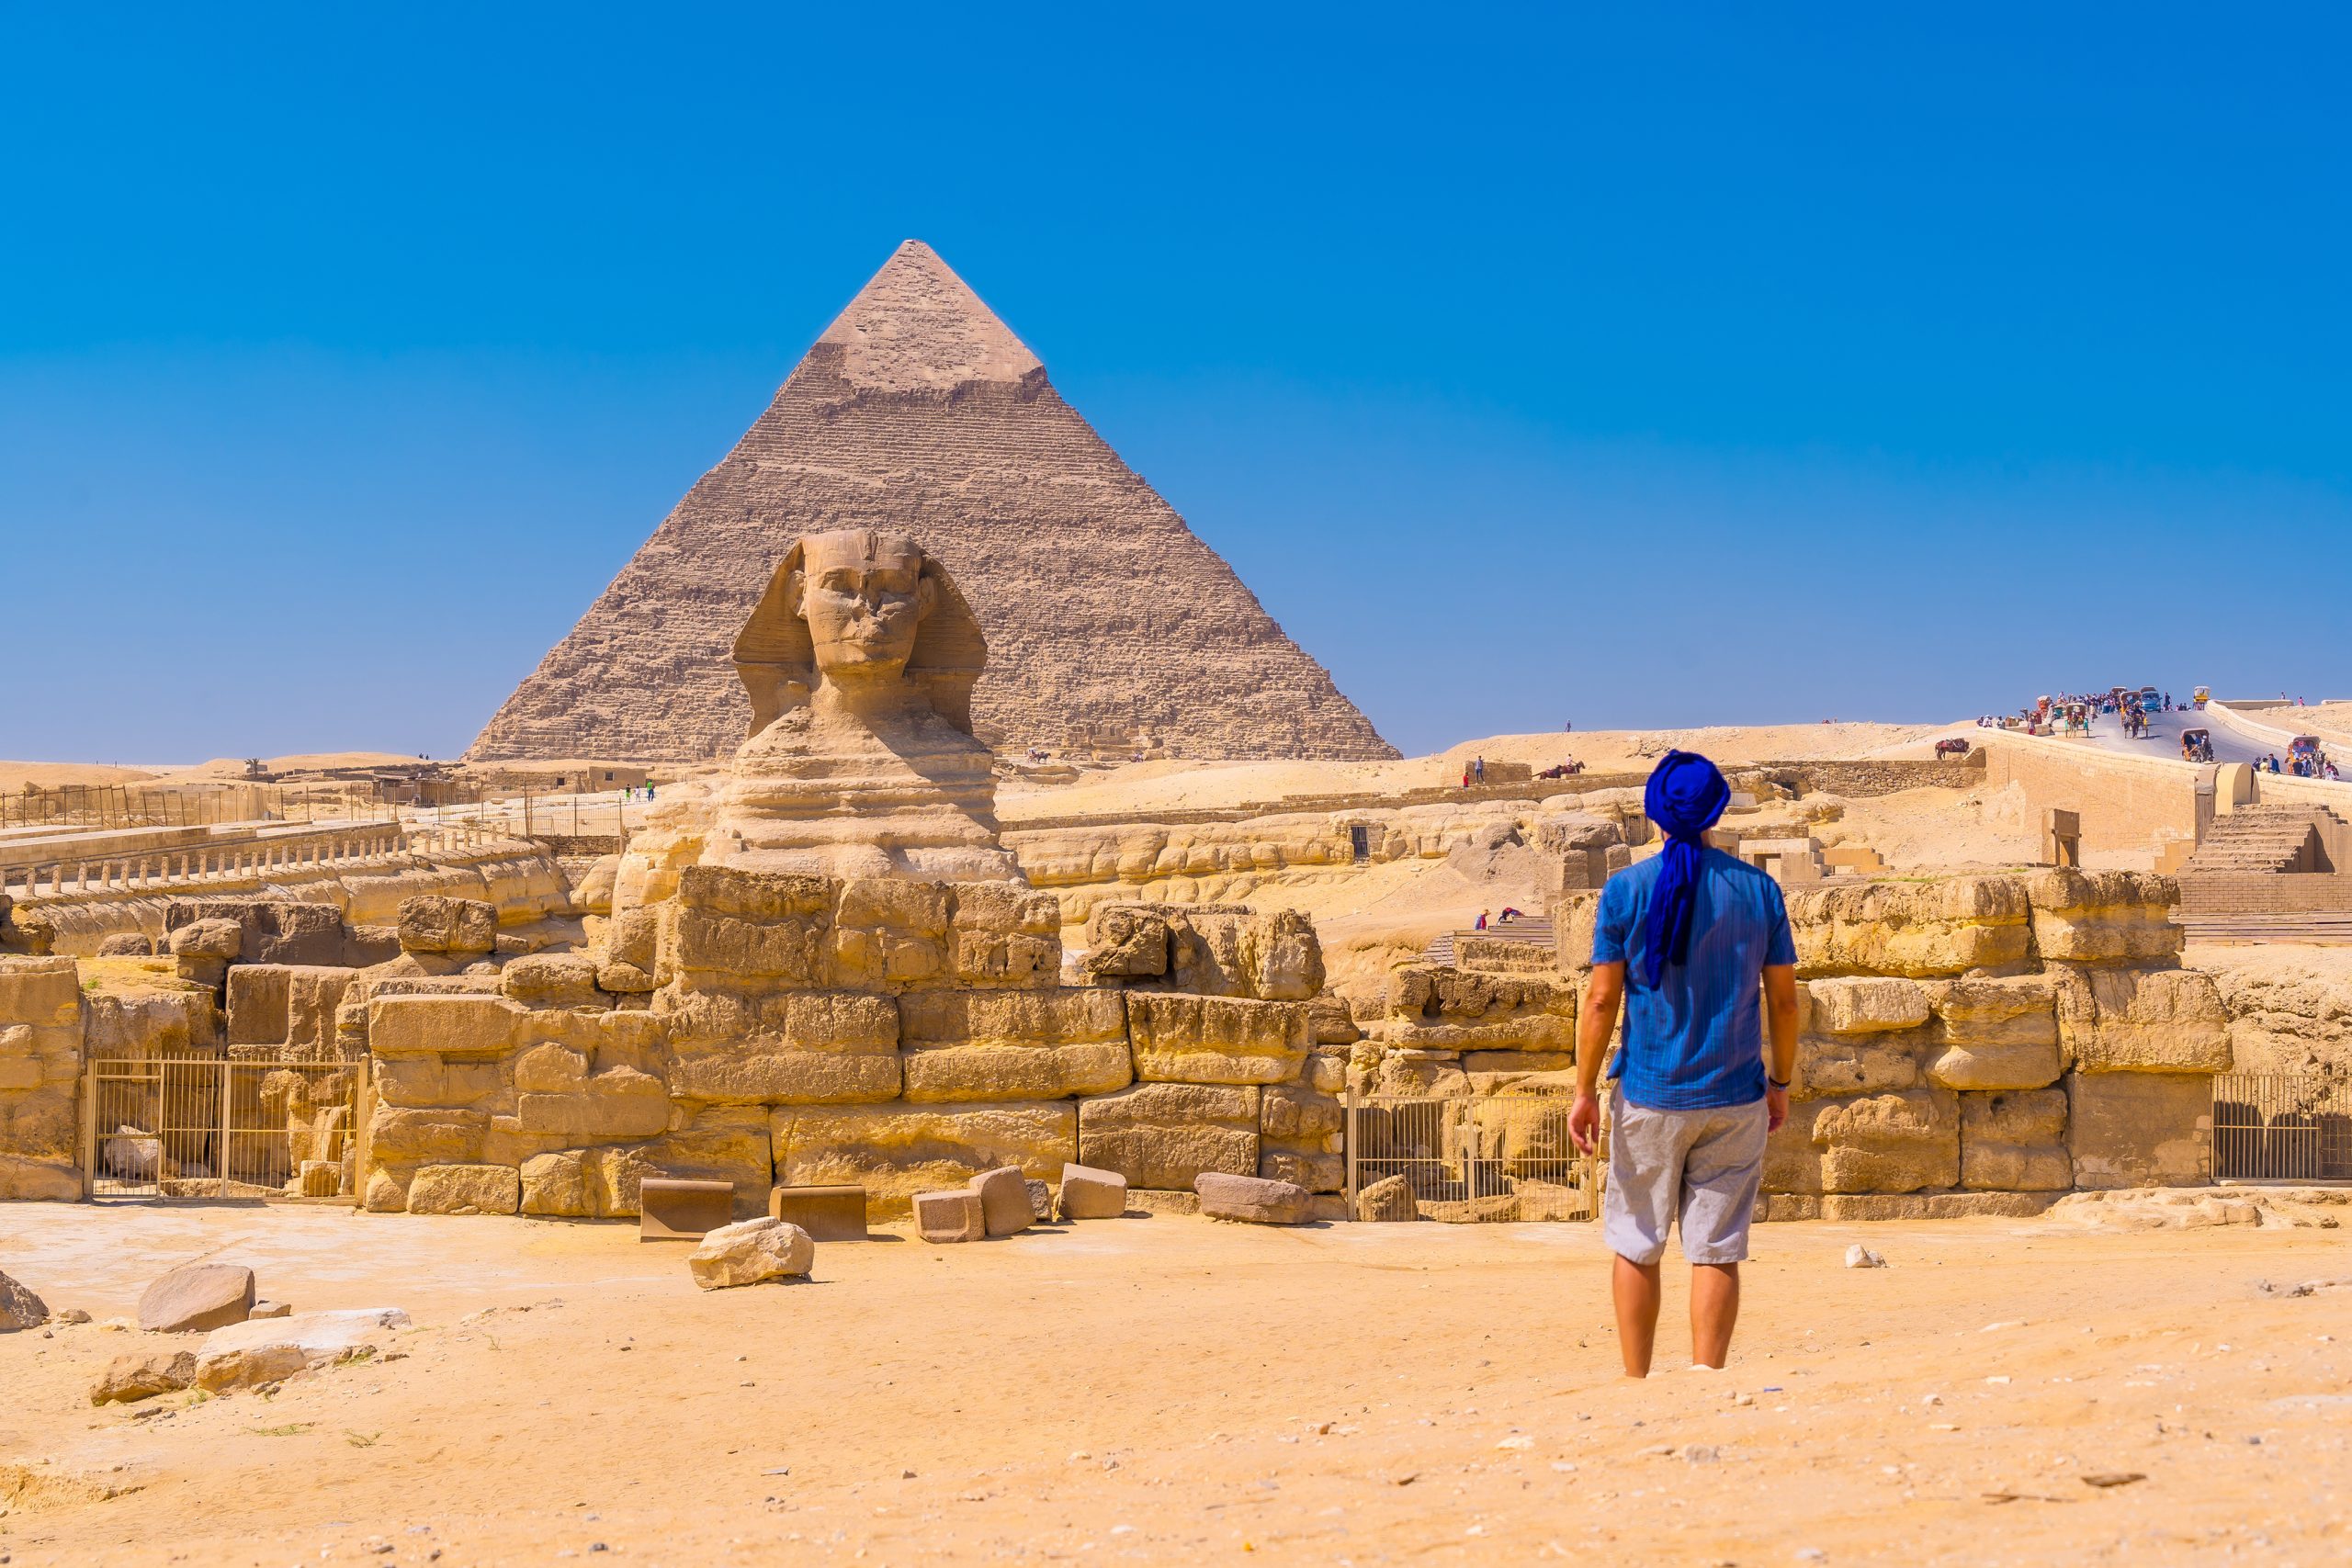 A young man walking towards the Great Sphinx of Giza and in the background the pyramid of Khafre,